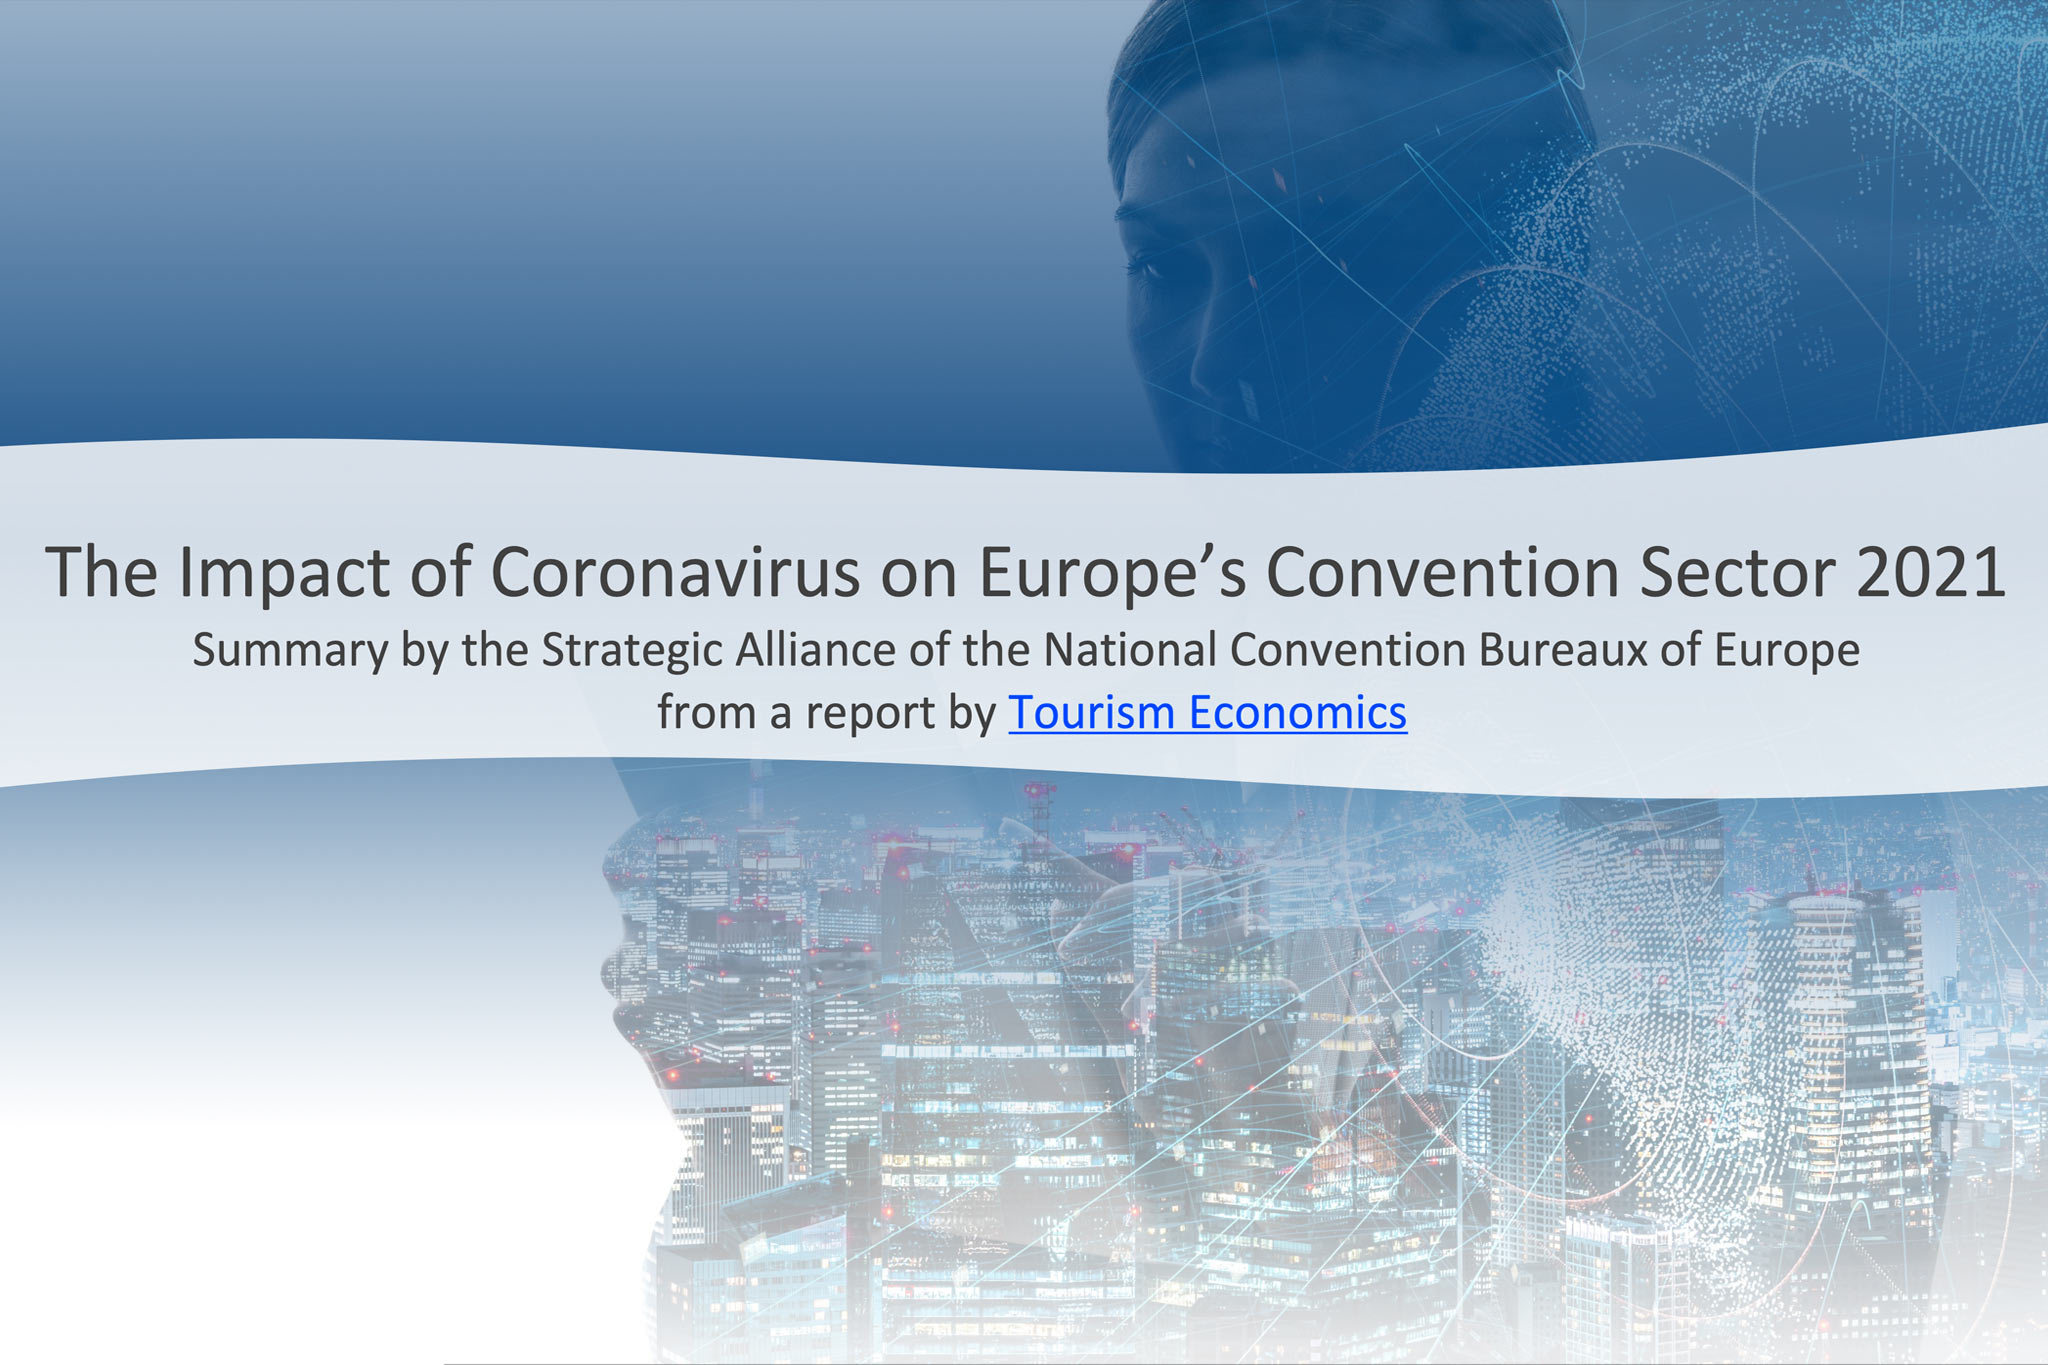 Image showing the dront page of the report “The Impact of Coronavirus on Europes Convention Sector 2021”